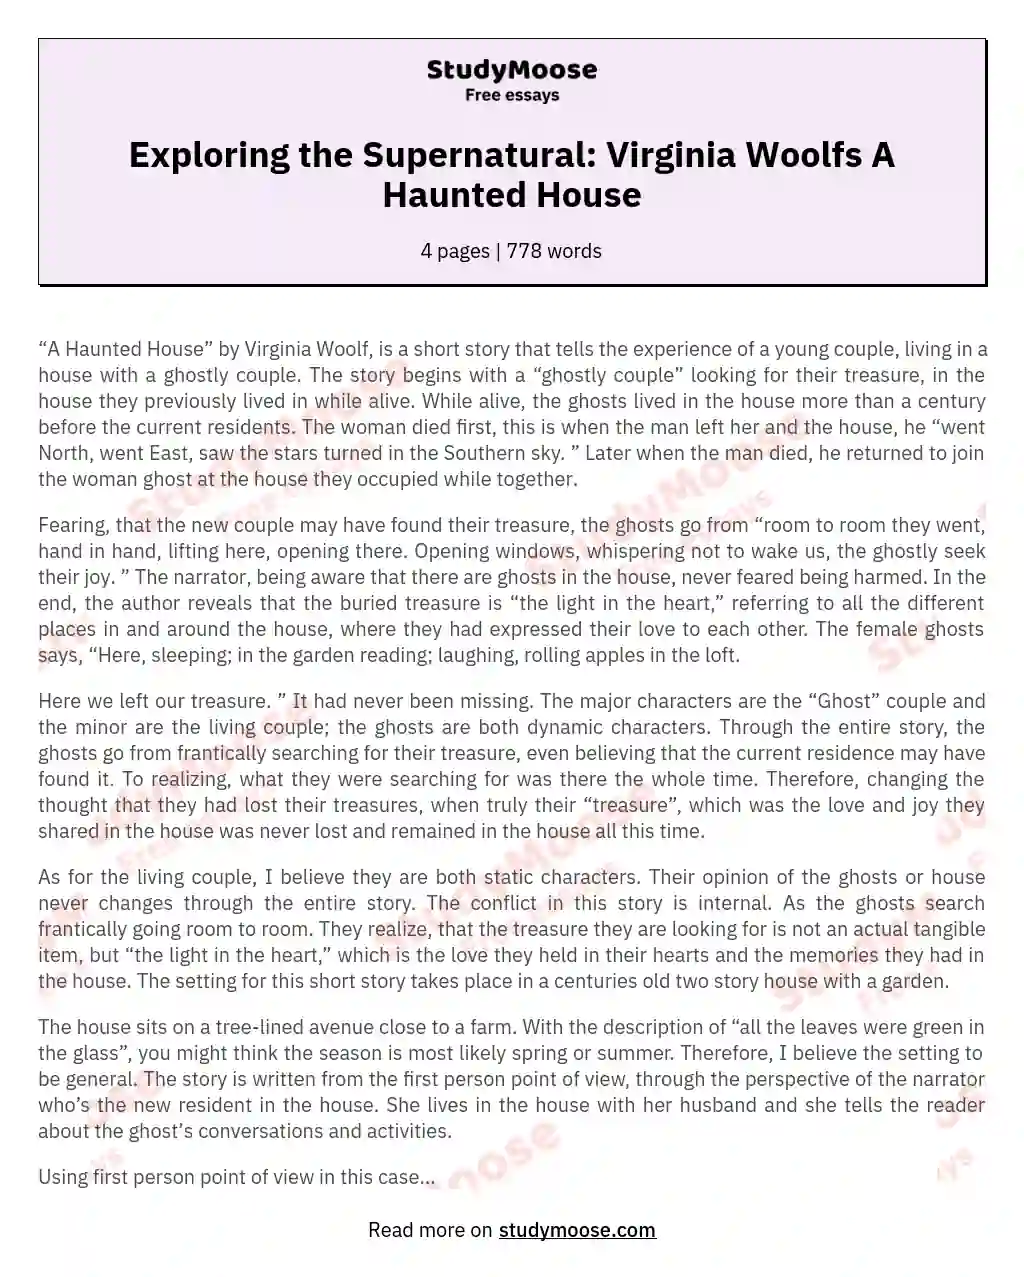 Exploring the Supernatural: Virginia Woolfs A Haunted House essay